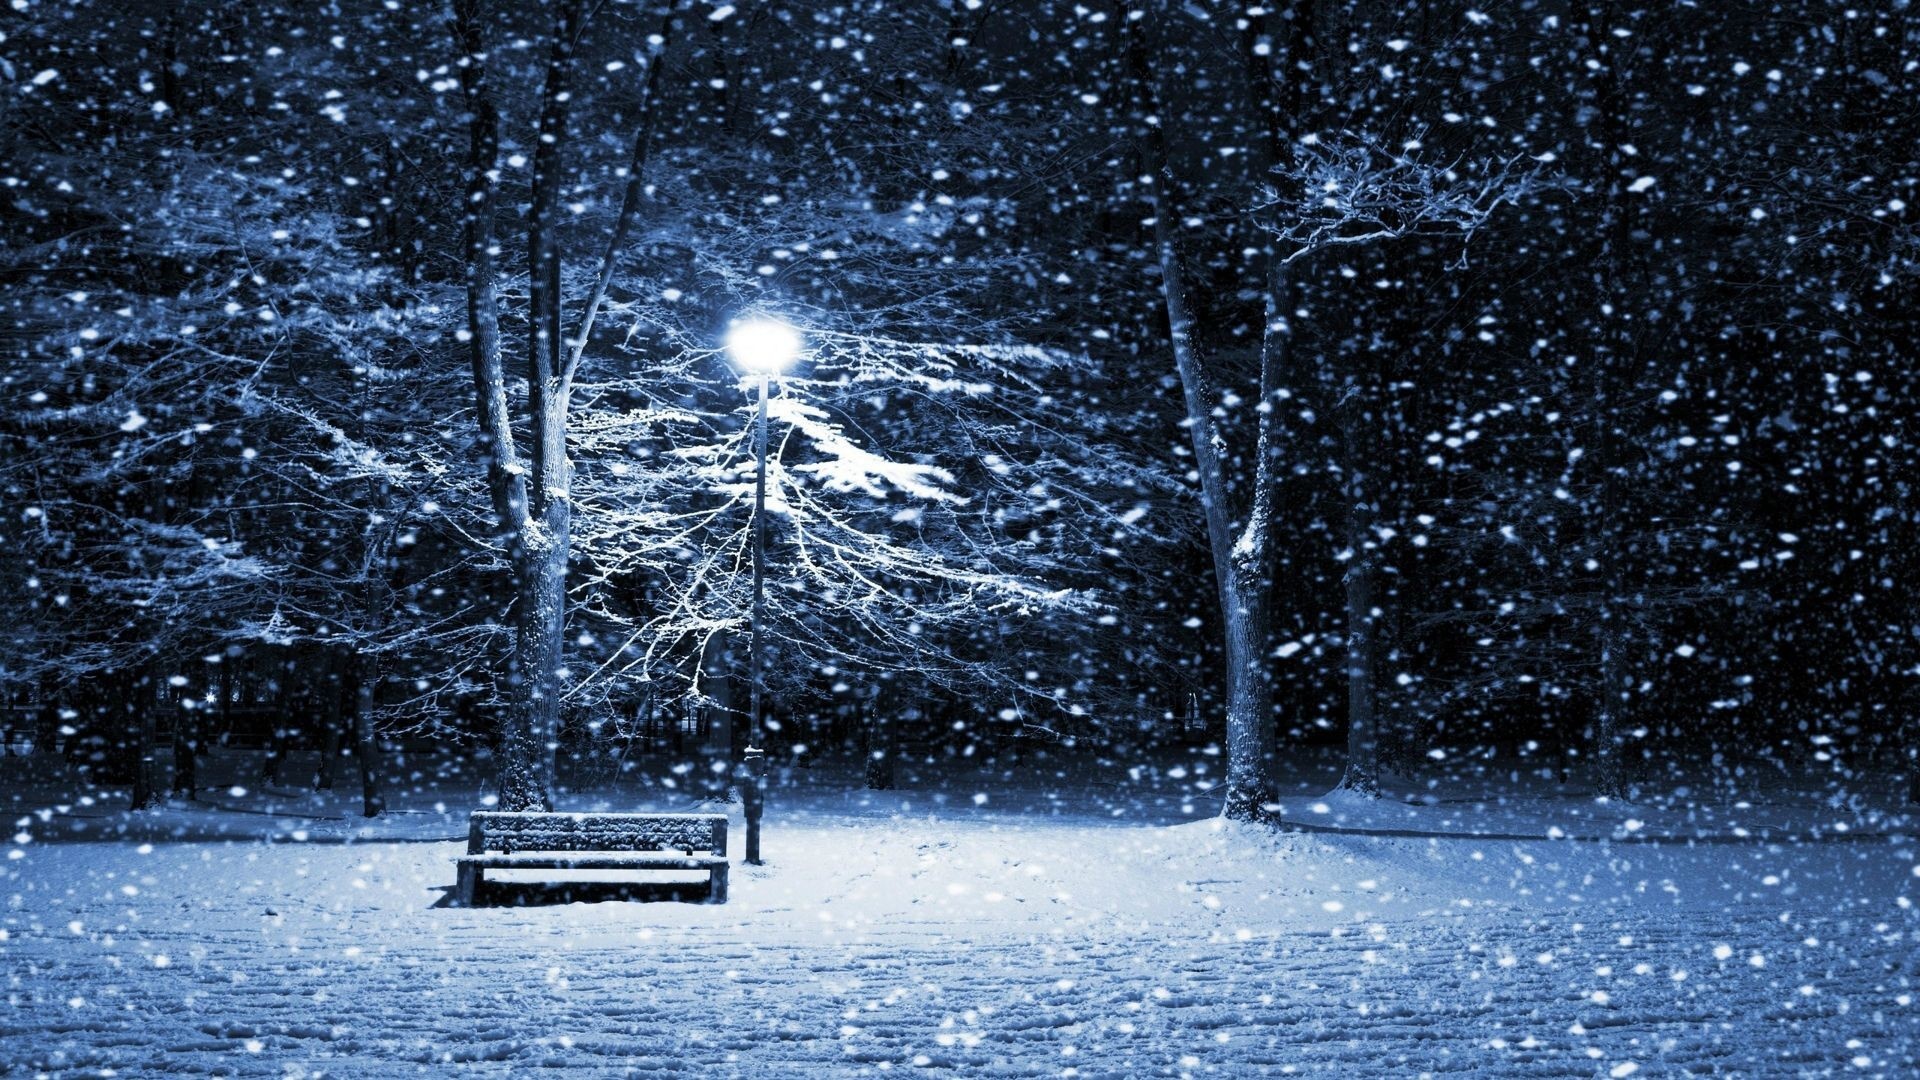 Snowing On Park Bench